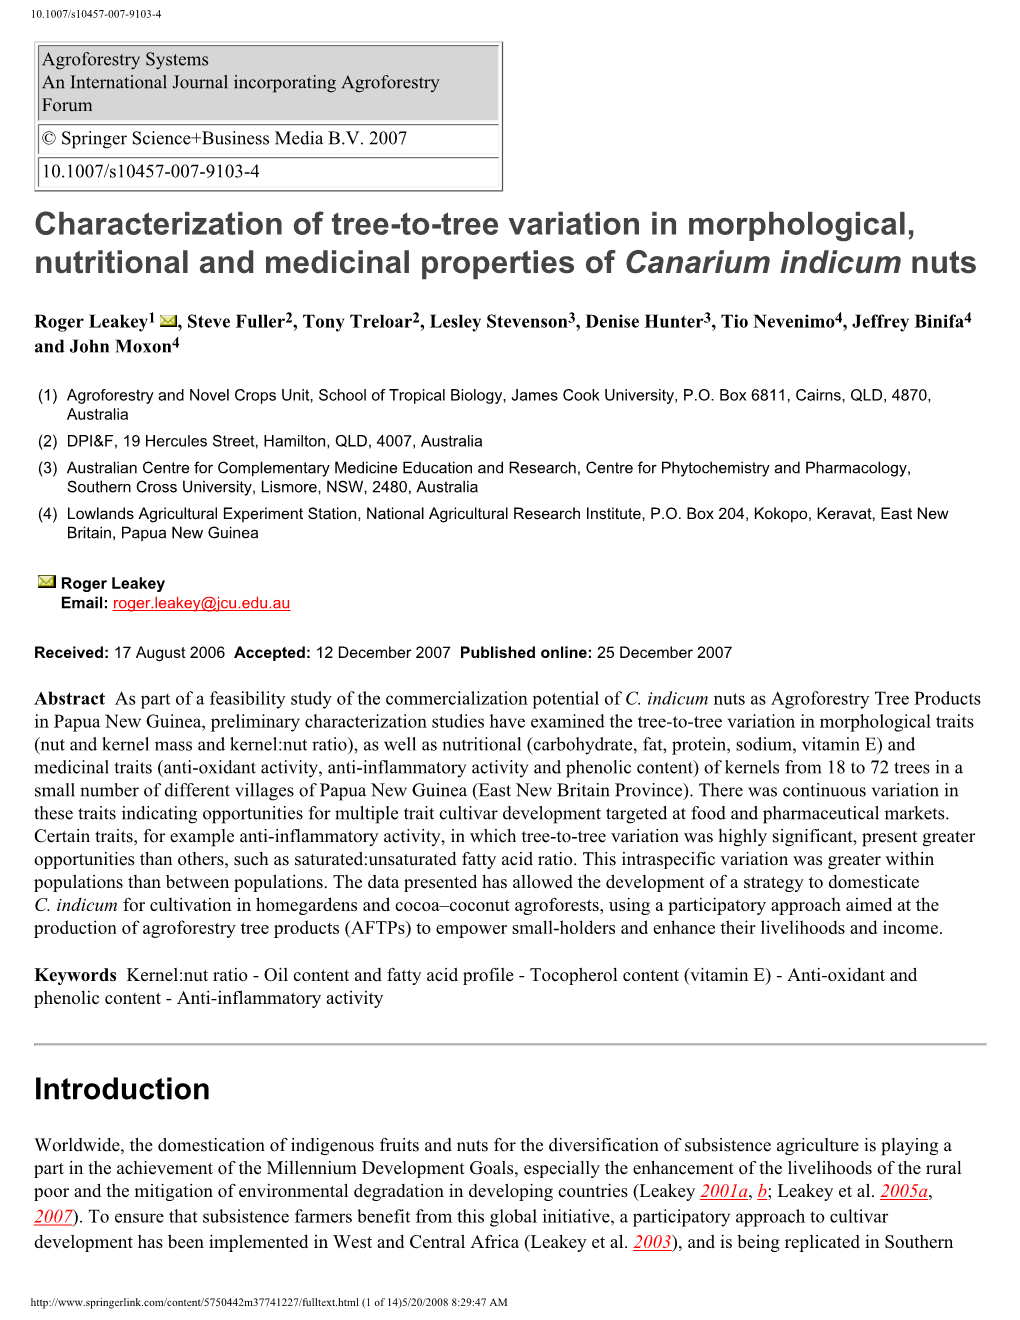 Characterization of Tree-To-Tree Variation in Morphological, Nutritional and Medicinal Properties of Canarium Indicum Nuts